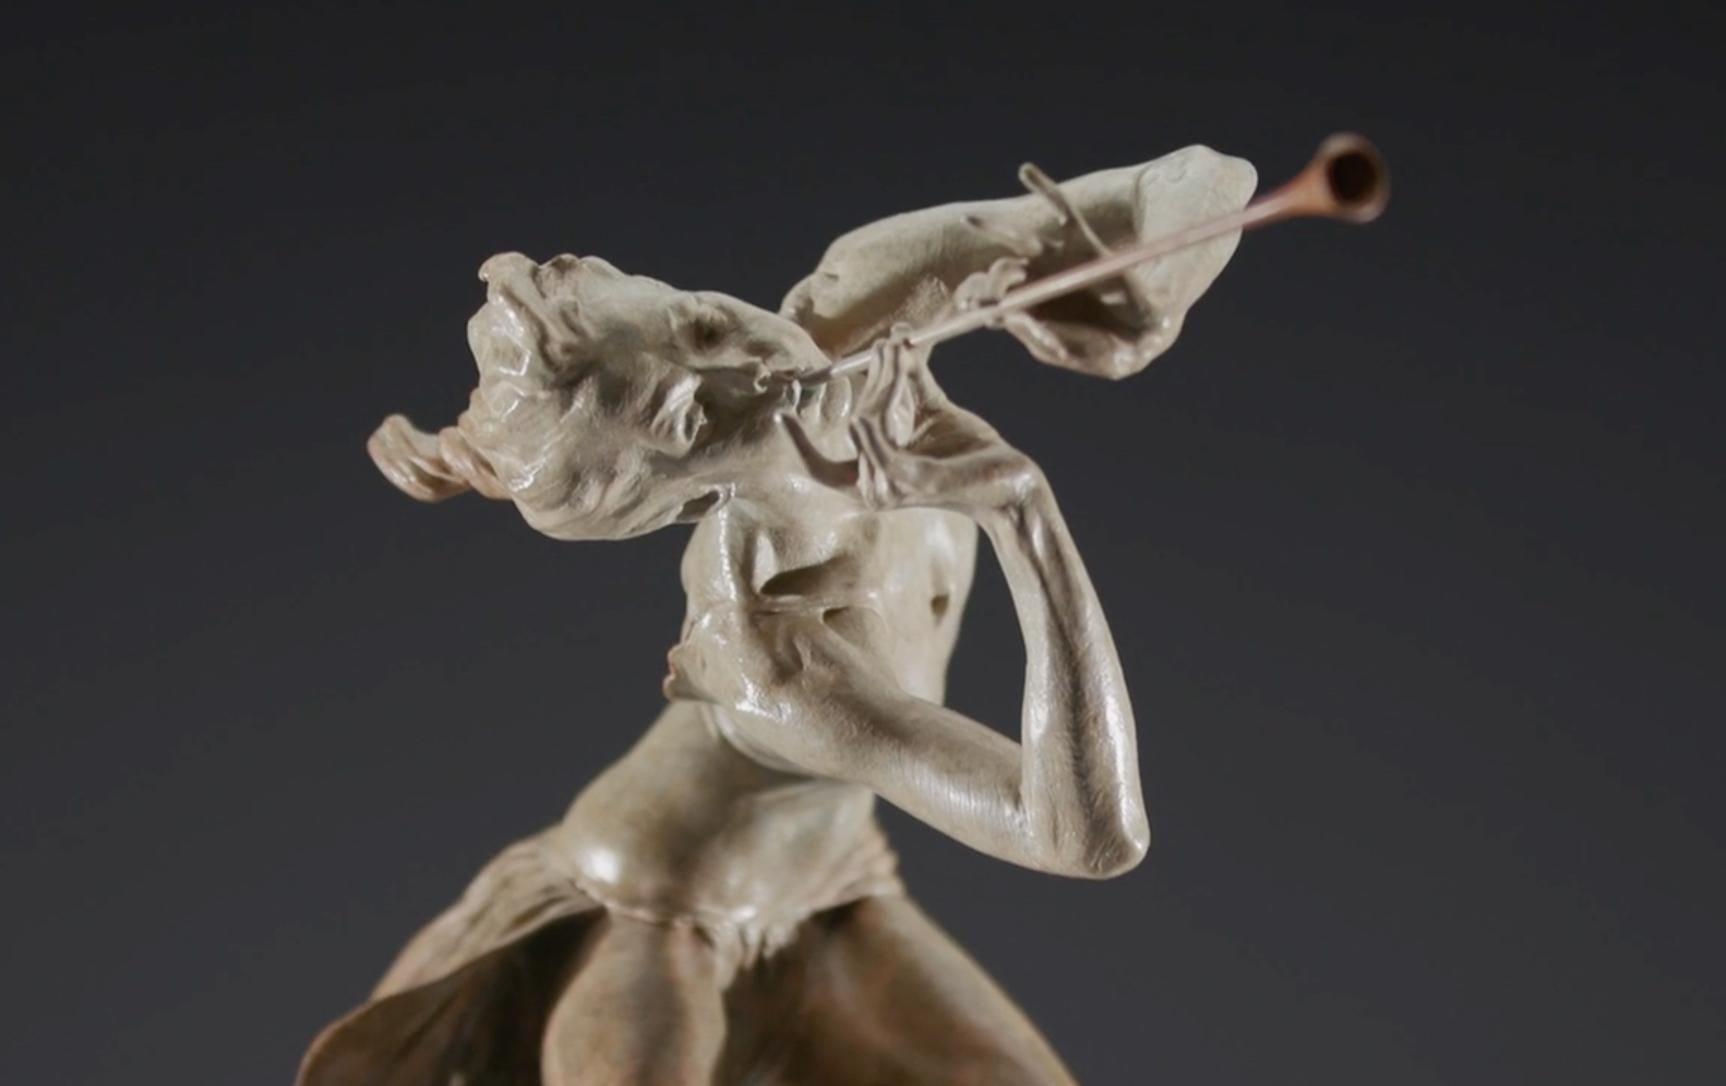 The Trumpeter represents the very embodiment of joy. With a thousand nuances of form, from her outstretched fingers to the carefree tilt of her head, she conveys a sense of youth and hope that vibrates like the imaginary notes of music she plays. It